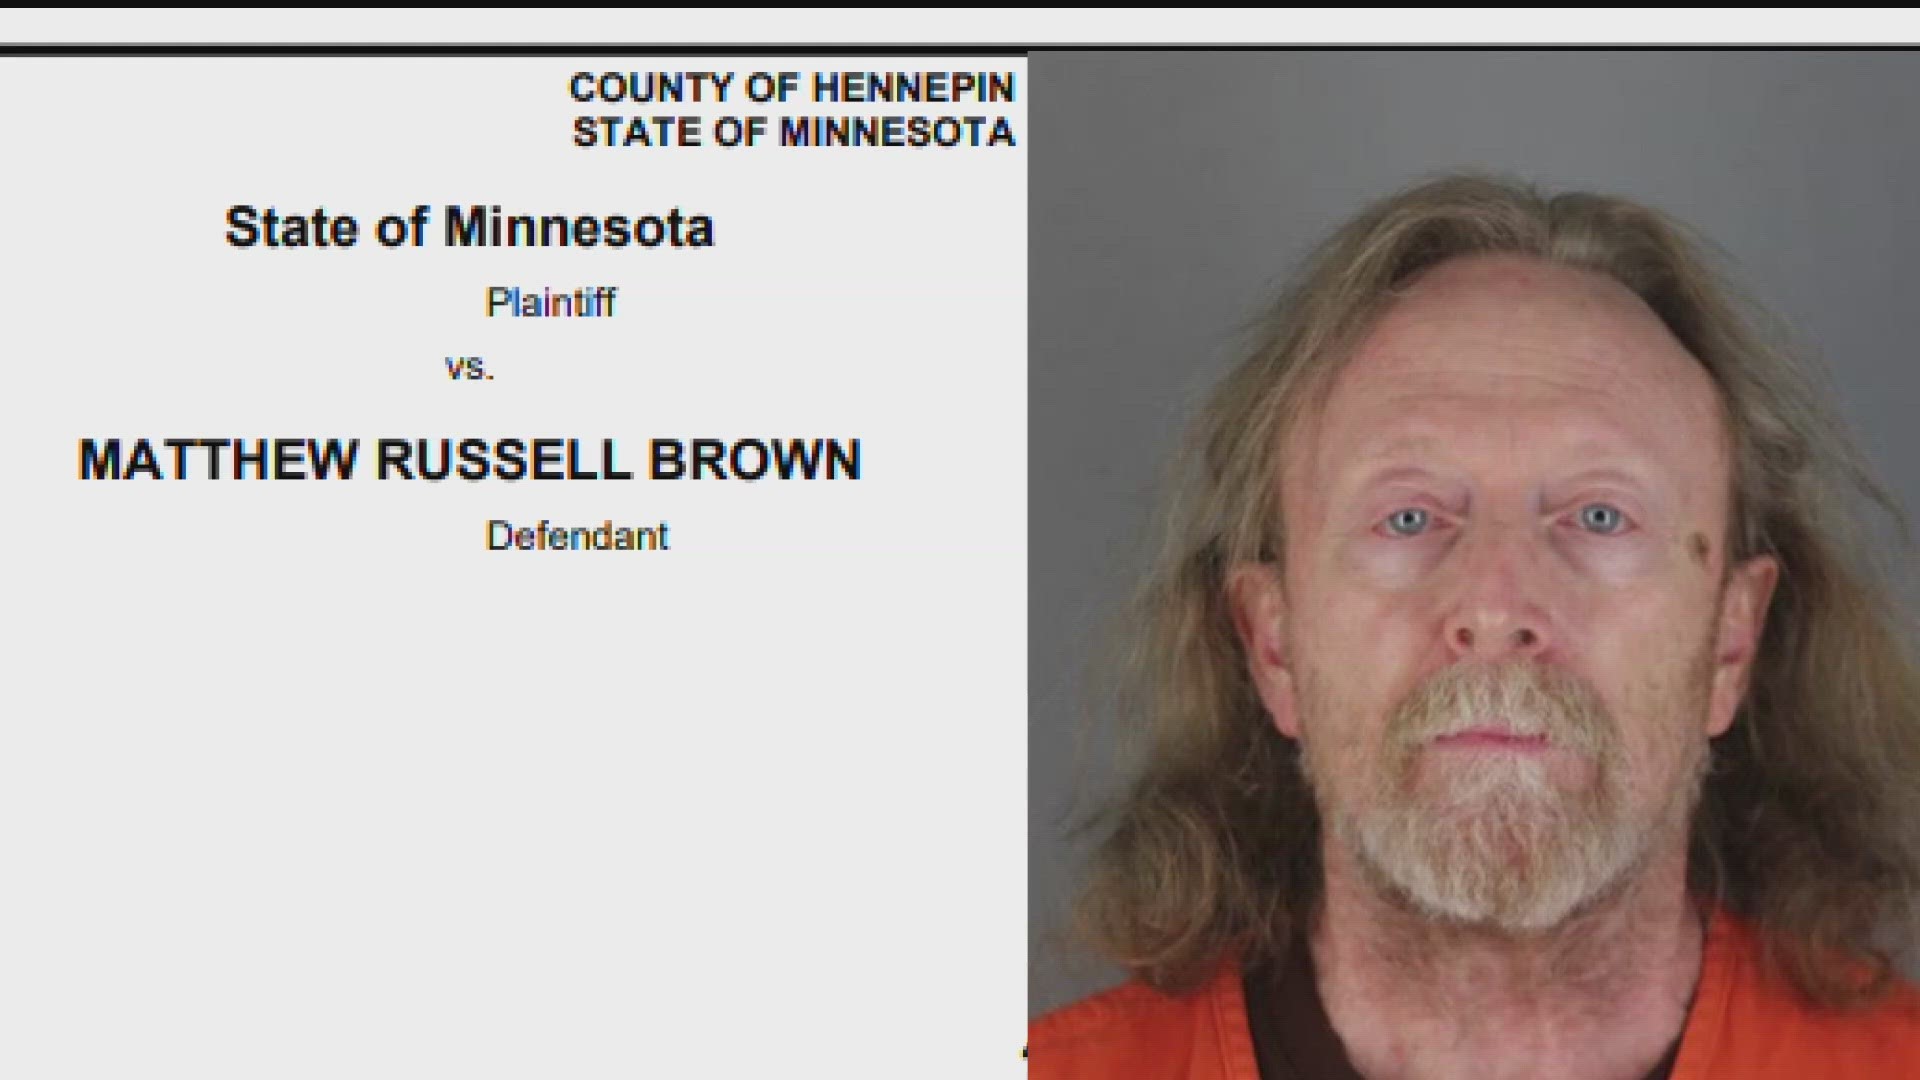 On Monday, the Hennepin County Attorney's Office indicted Matthew Brown in the 1984 death of Bob Miller, who was found stabbed in his Minneapolis home.